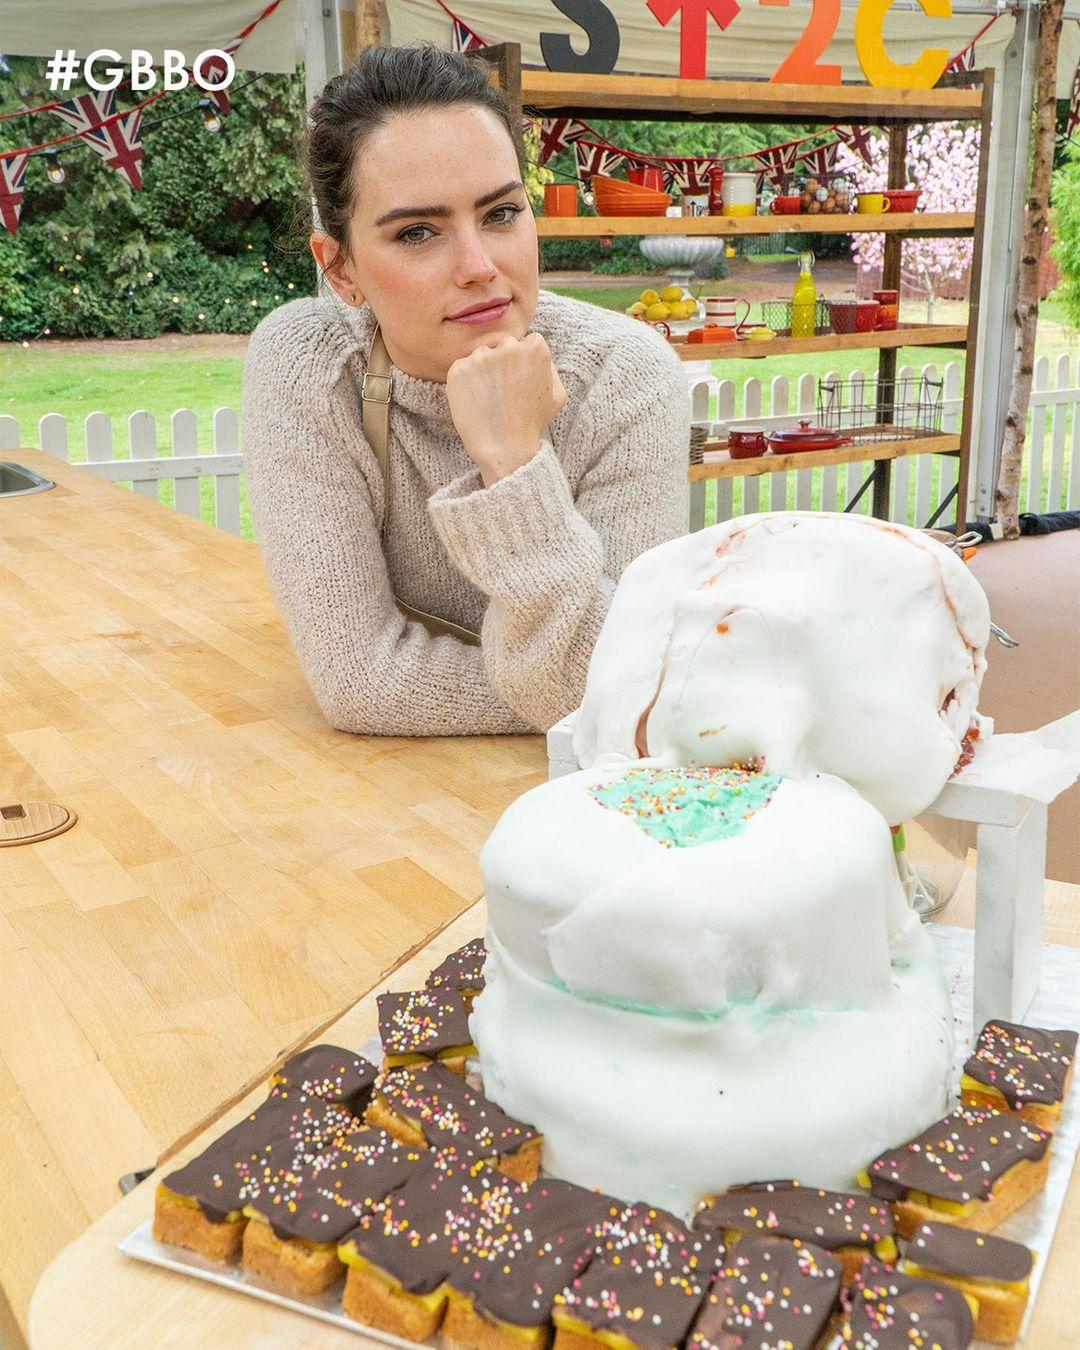 Daisy Ridley and her toilet bowl cake